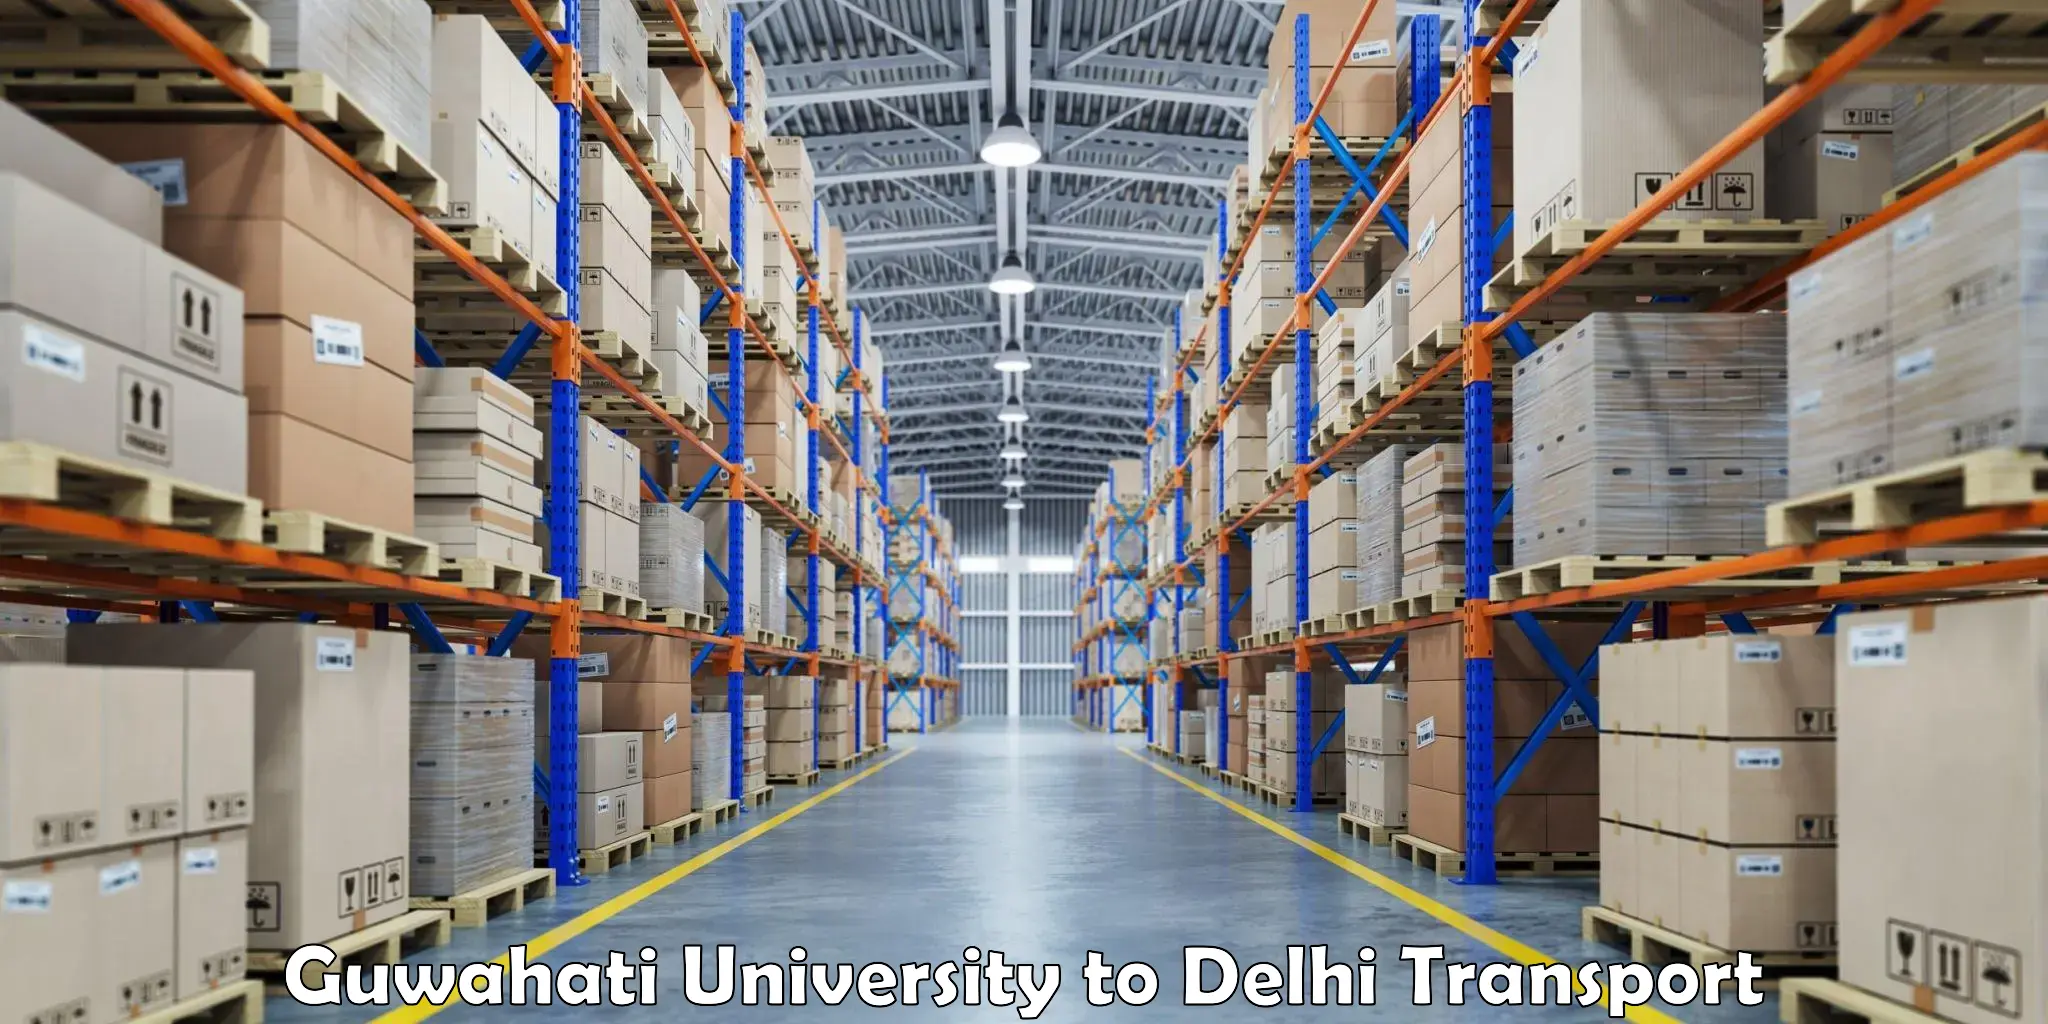 Container transport service in Guwahati University to Delhi